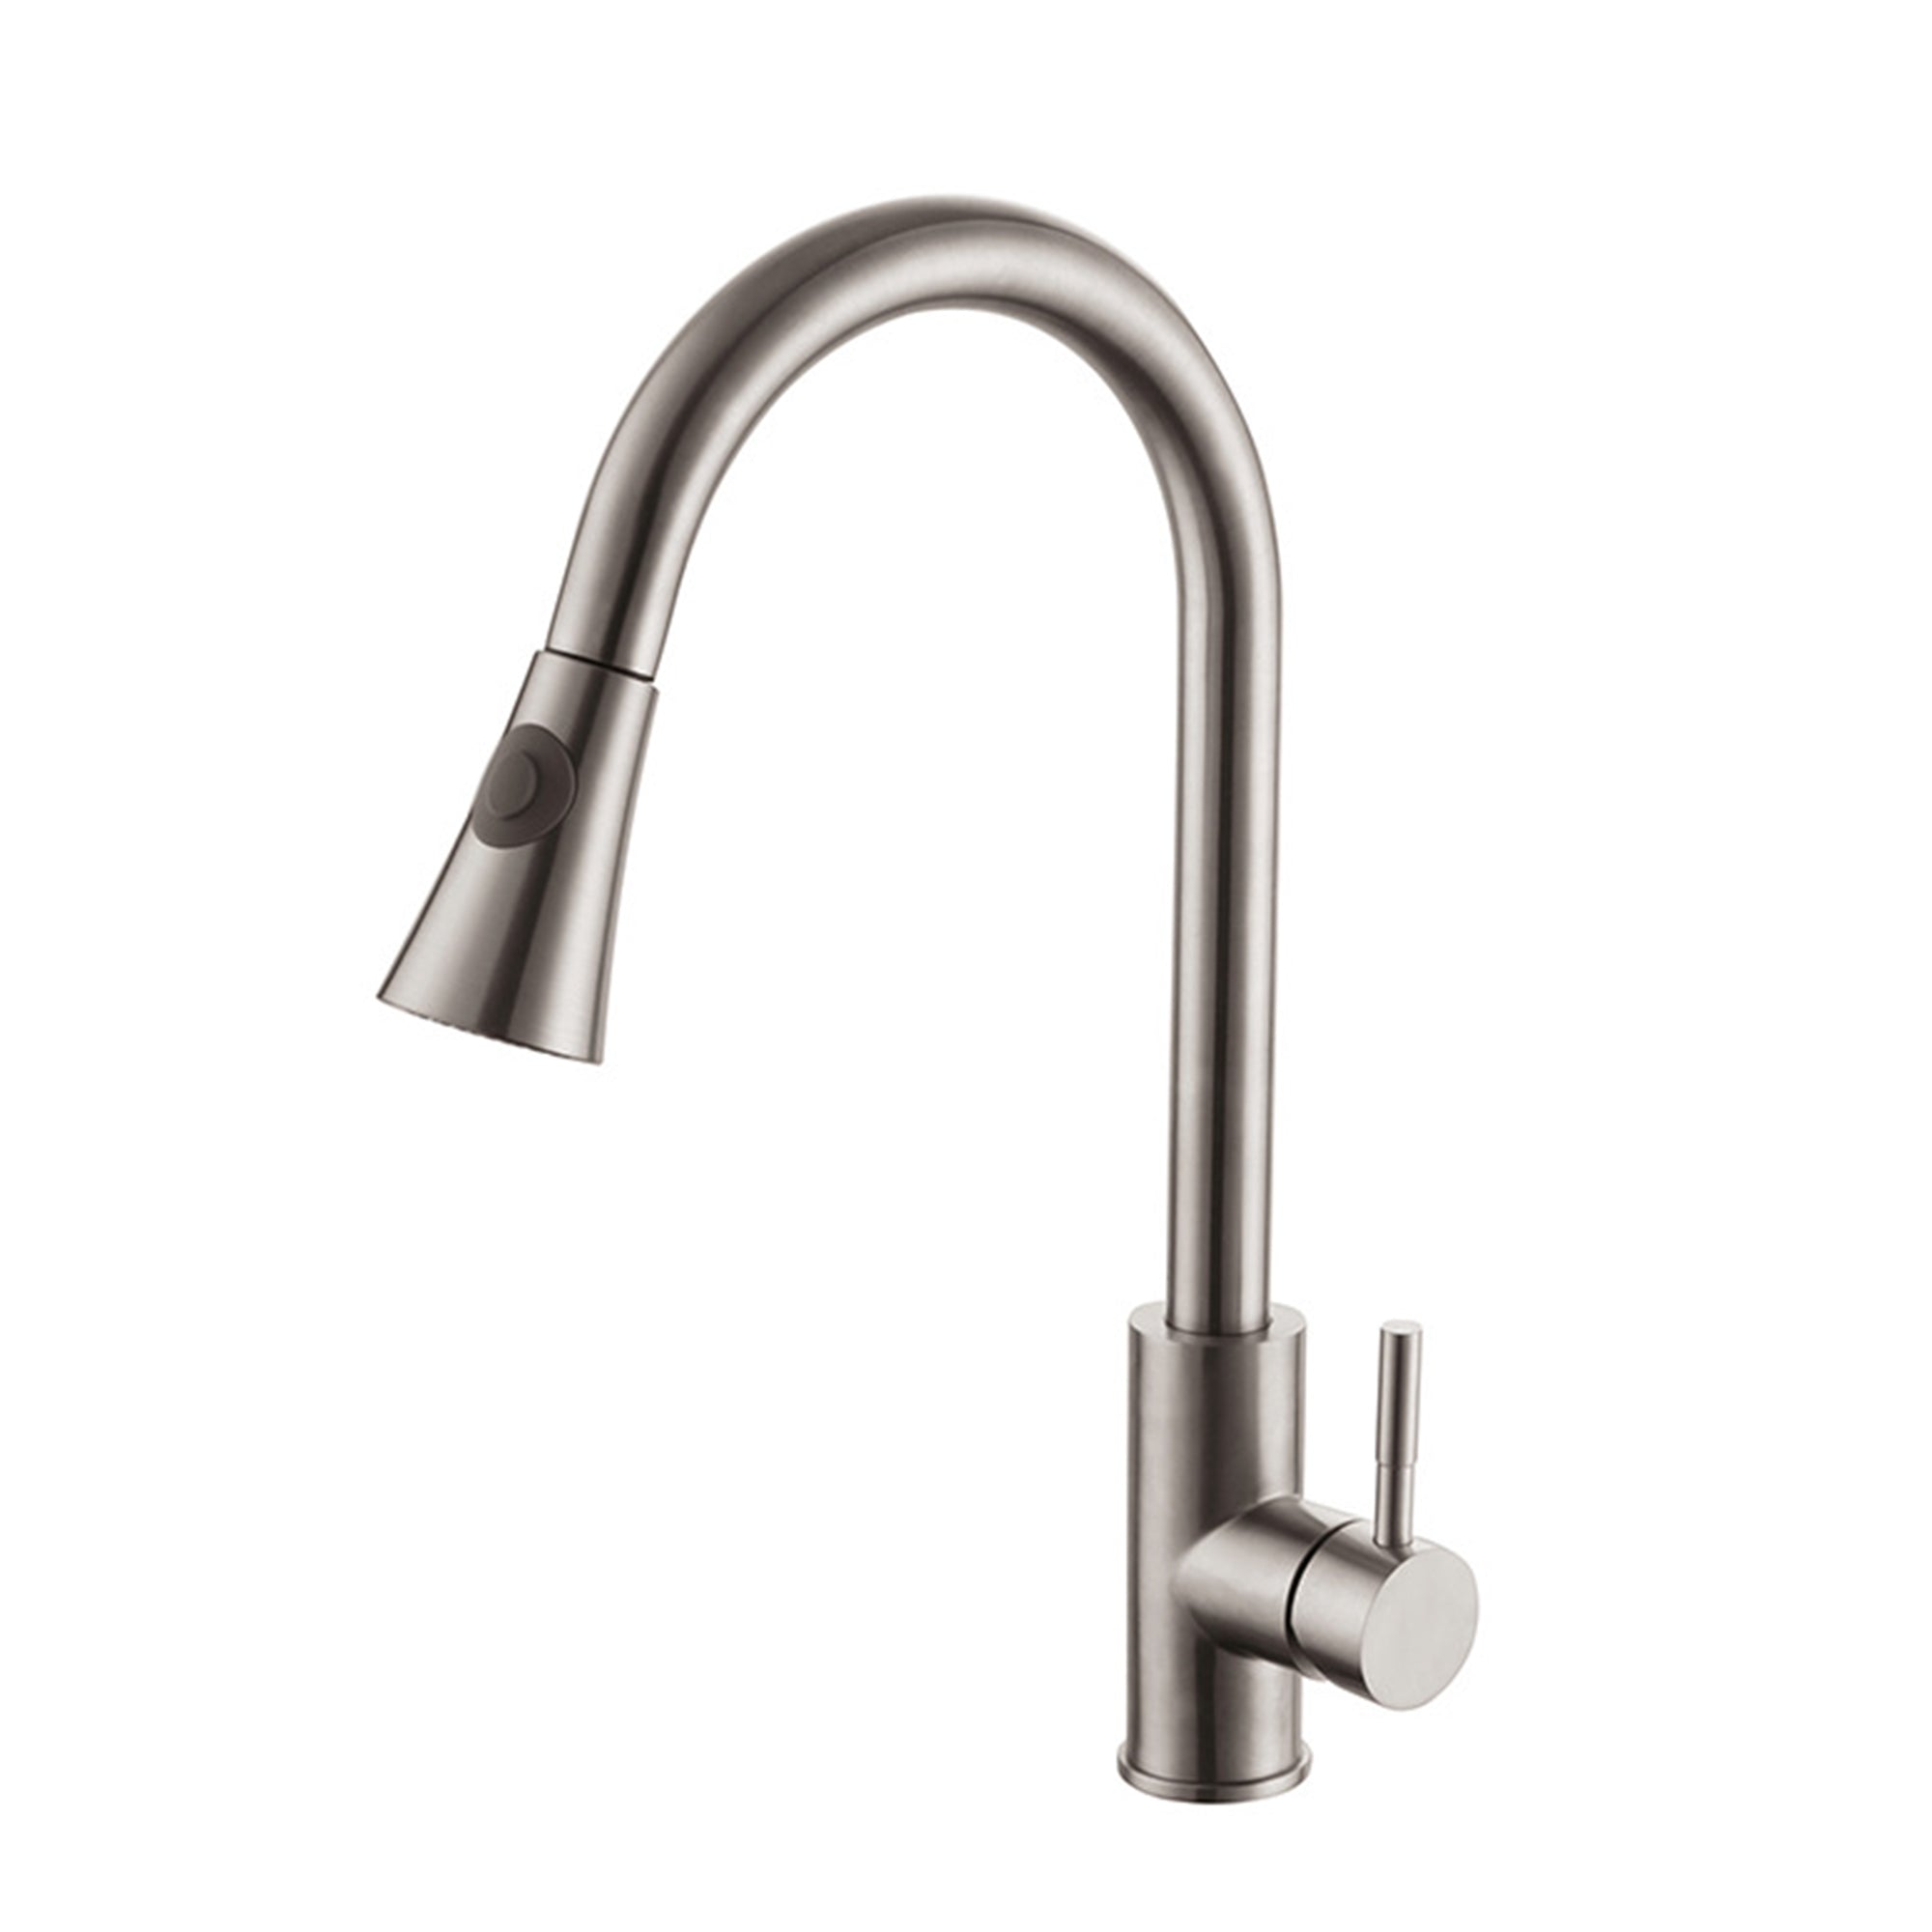 Retractable Pull Out Kitchen Sink Mixer Tap Faucet